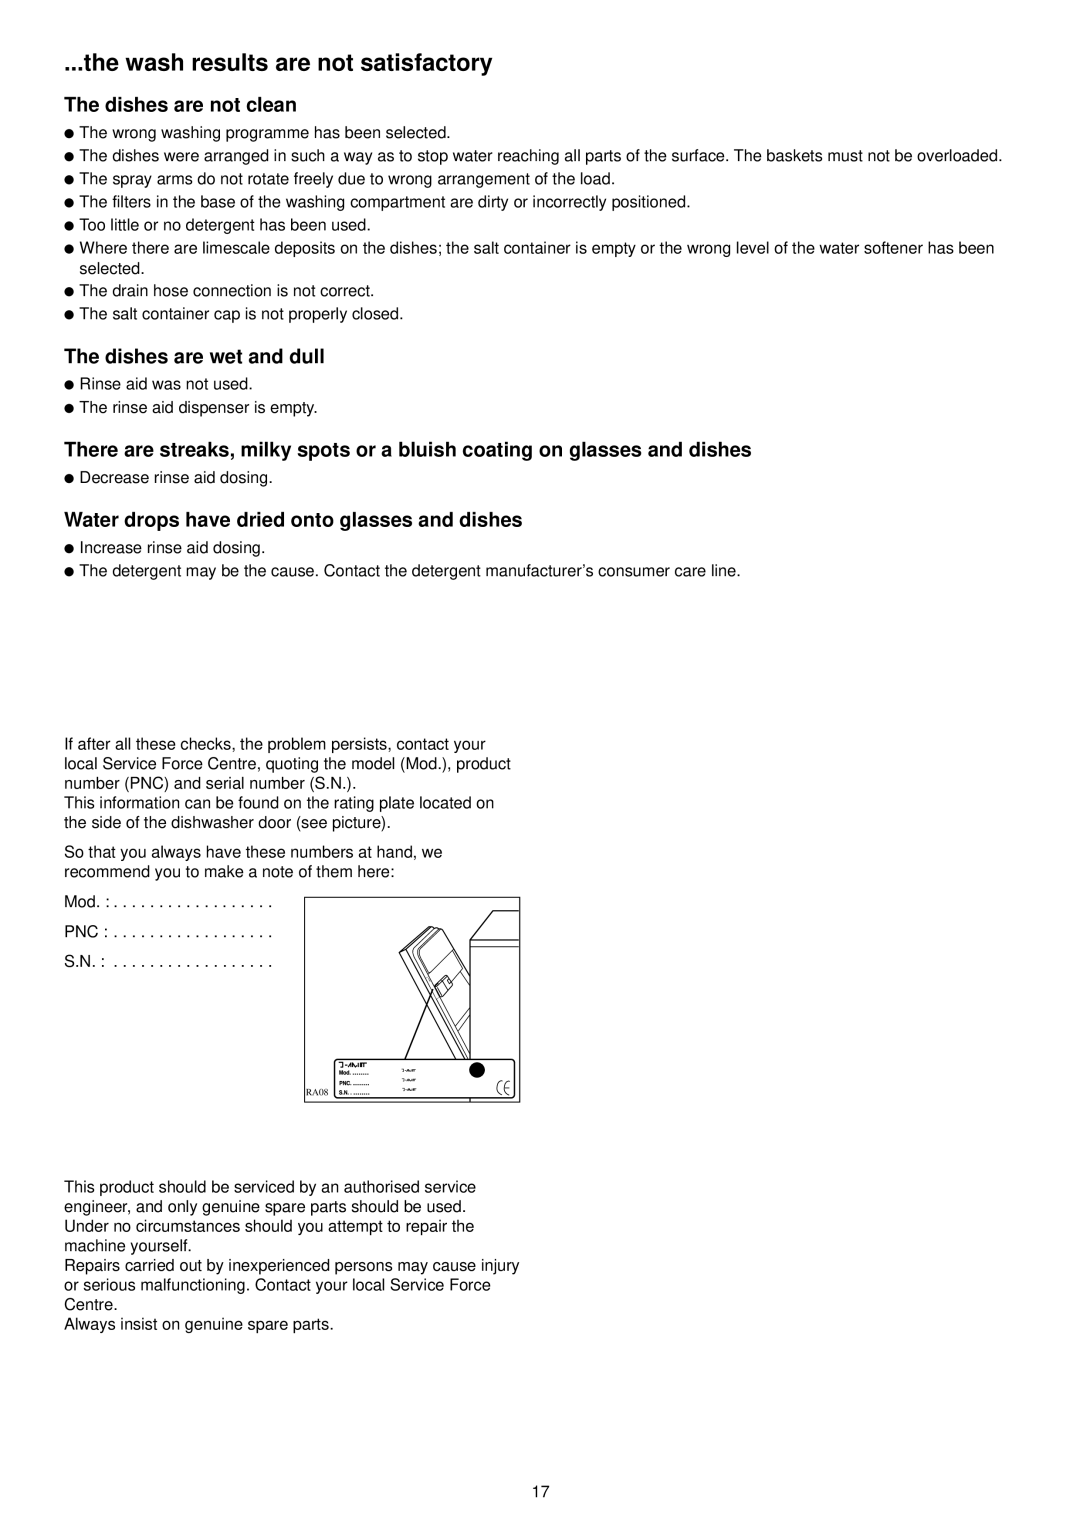 Zanussi DX 6451 manual the wash results are not satisfactory, The dishes are not clean, The dishes are wet and dull 